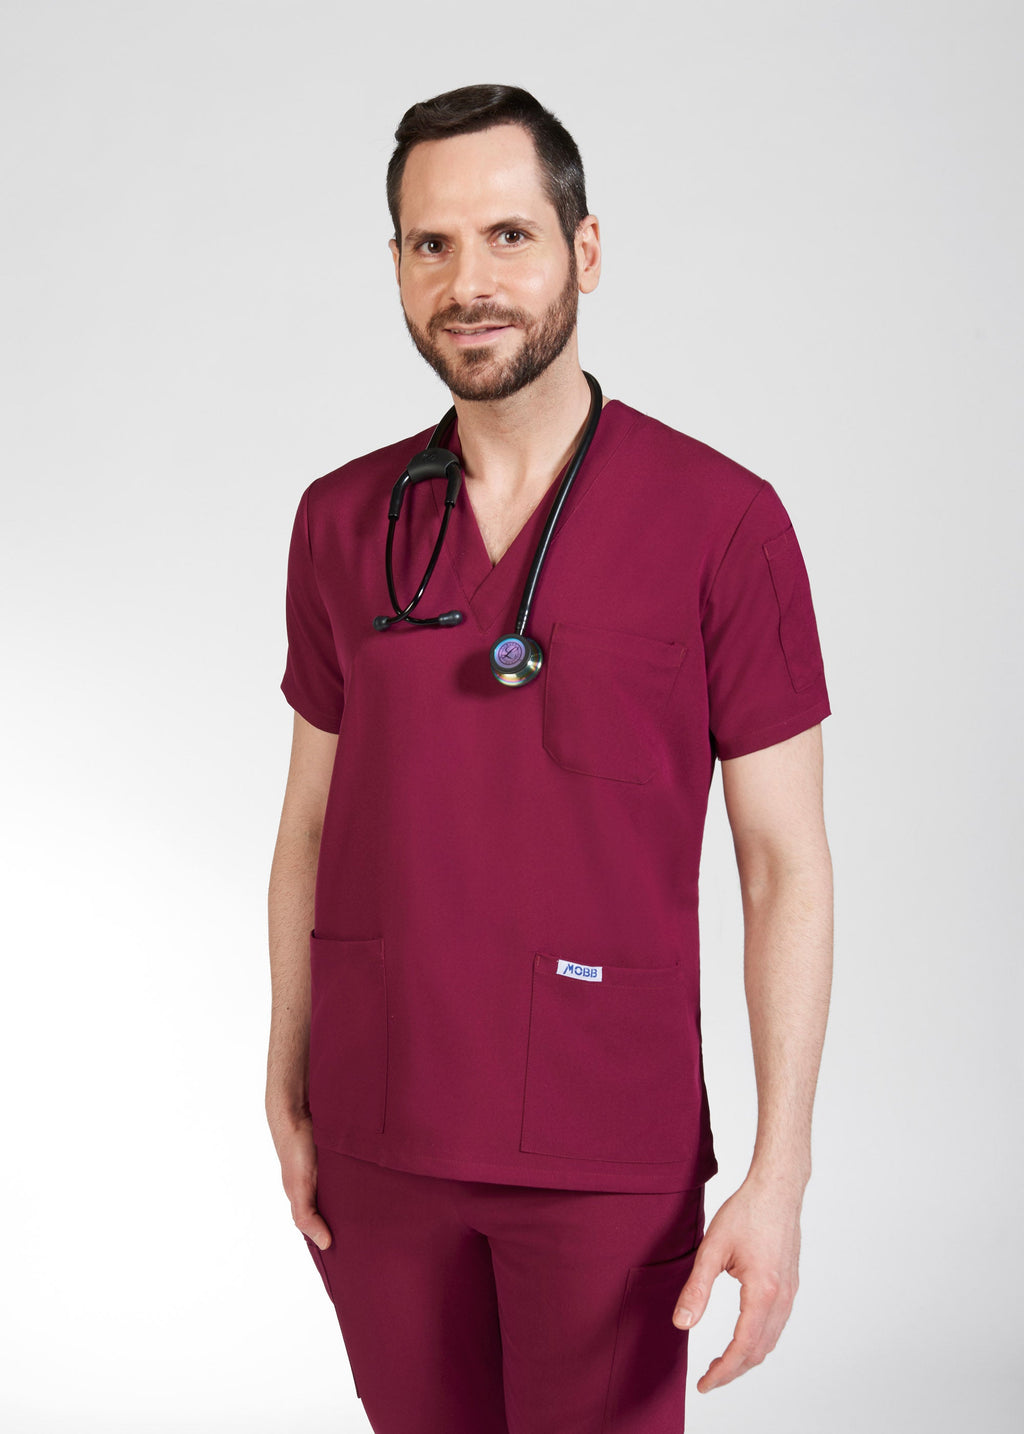 Product - MOBB Clearance Unisex Scrub Top The Andy